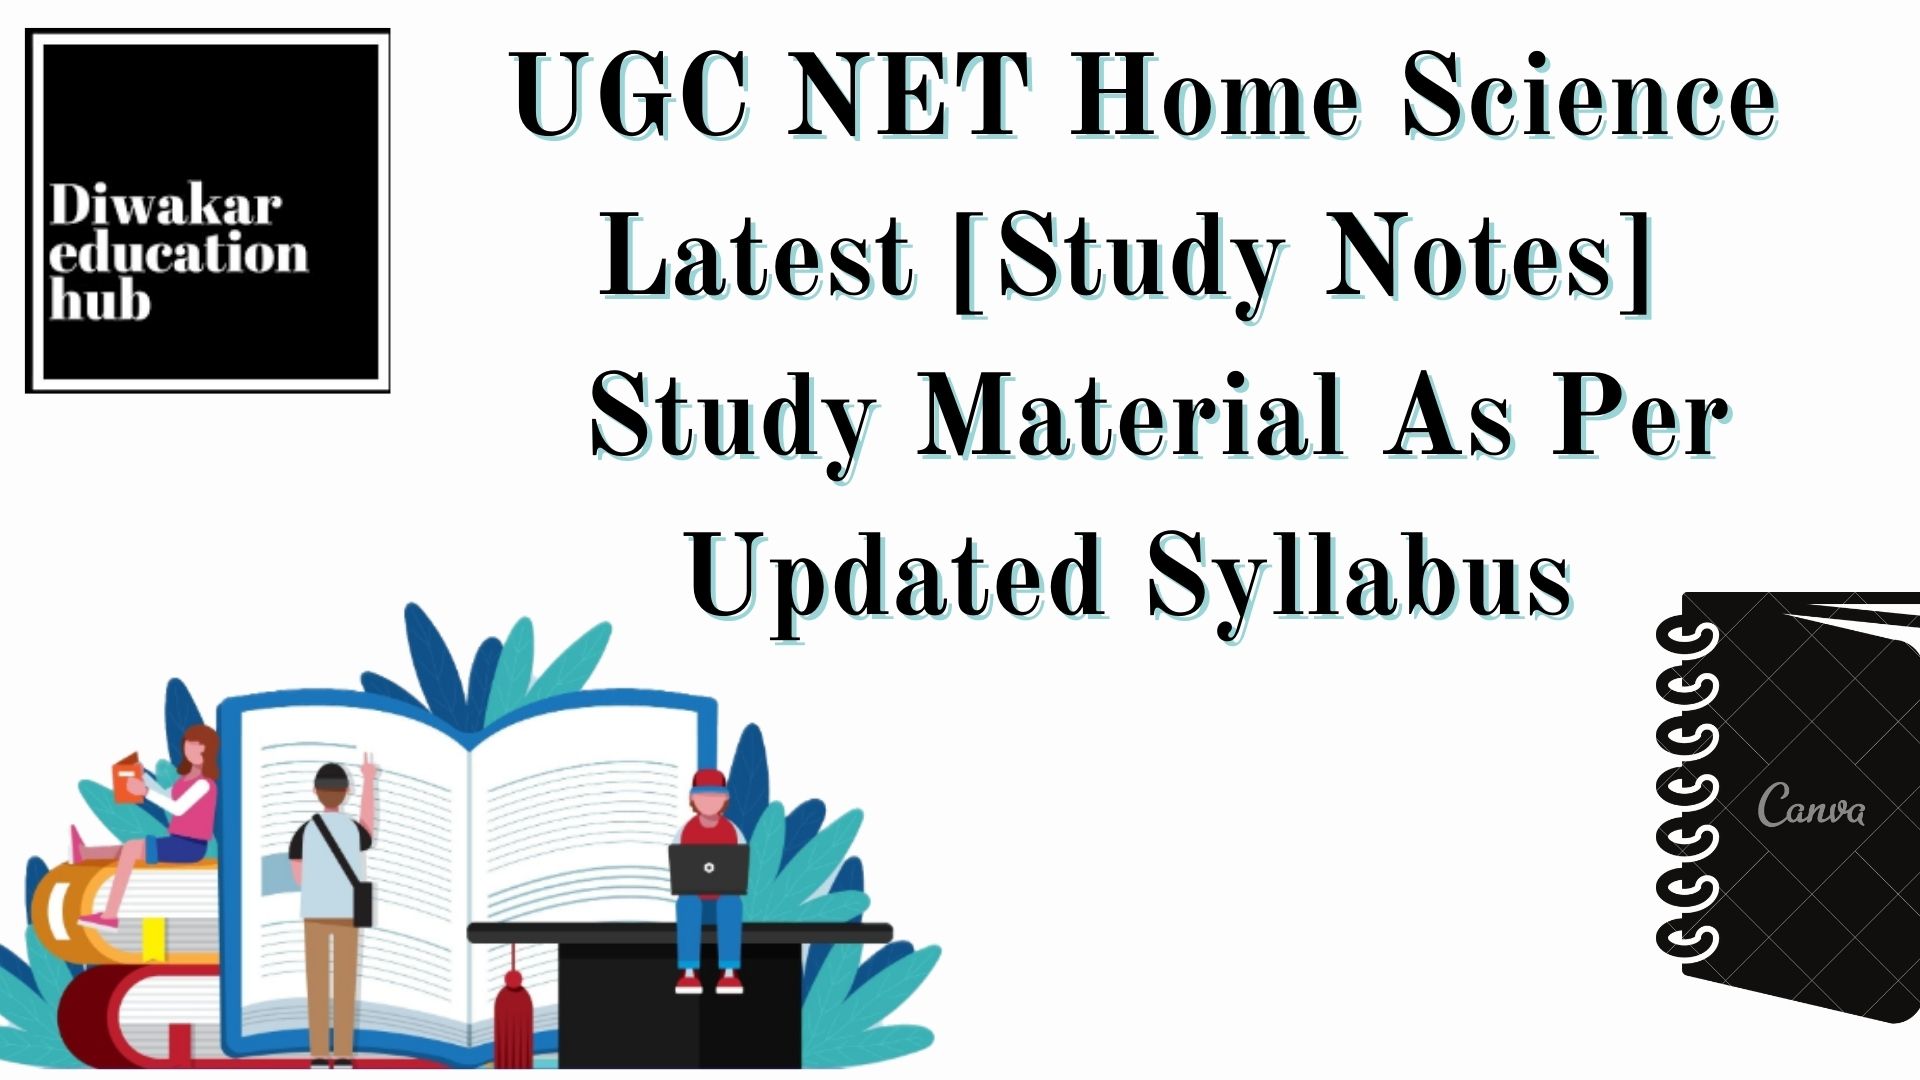 UGC NET Home Science Study Notes